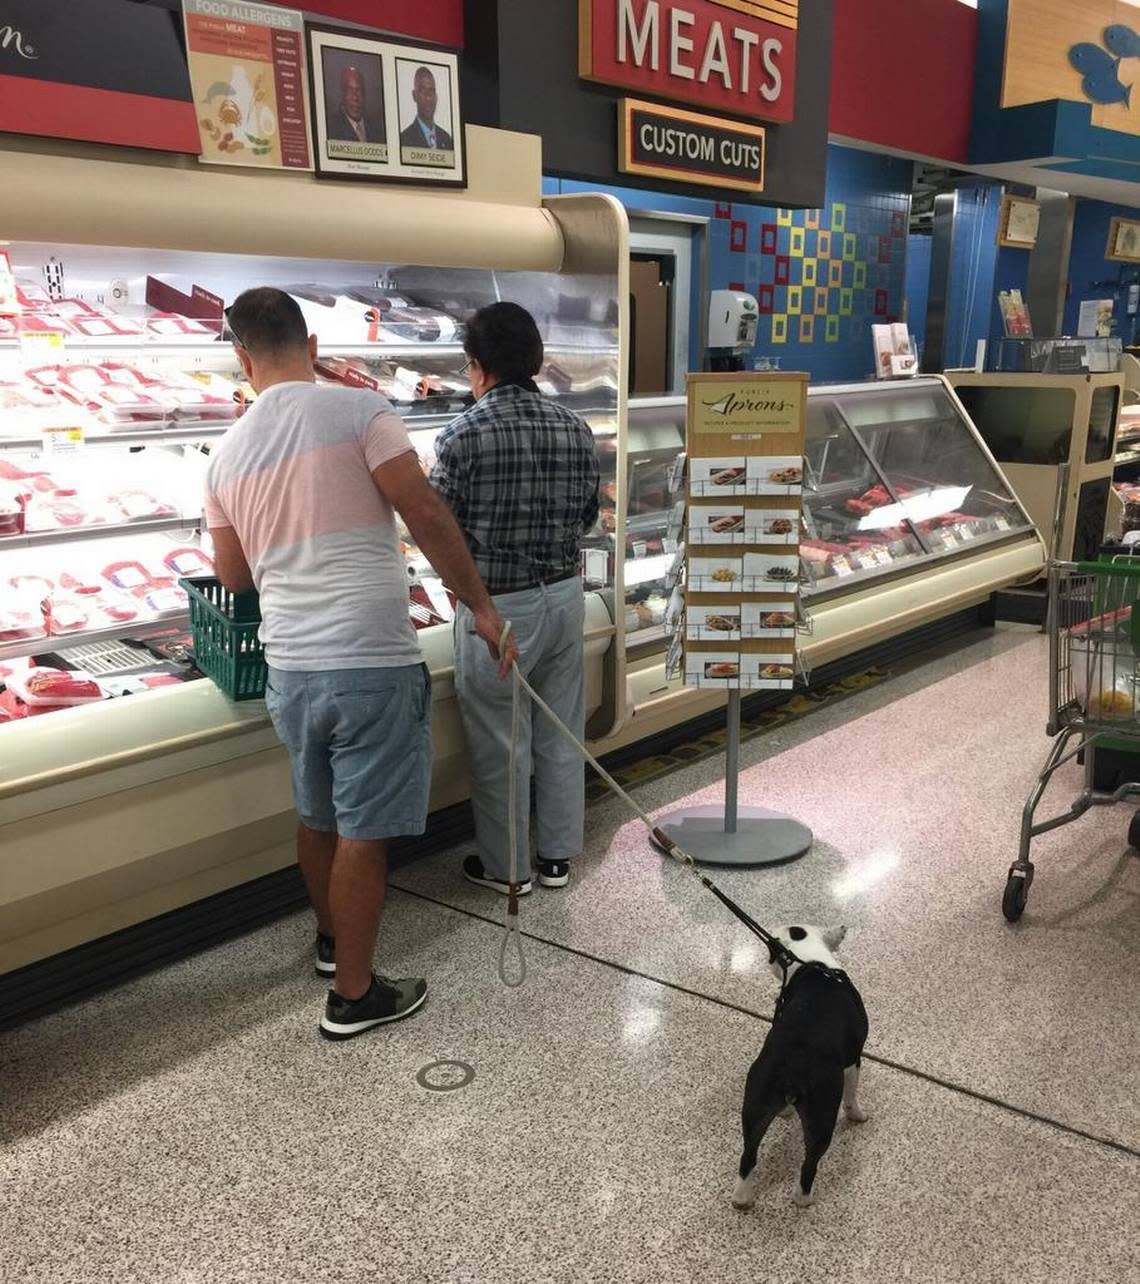 Shoppers and their dog on Jan. 3, 2017, at Publix on Biscayne Boulevard north of downtown Miami. Unless dogs are true service animals they are forbidden inside Publix supermarkets according to corporate policy. The rule includes not permitting emotional support animals inside stores.